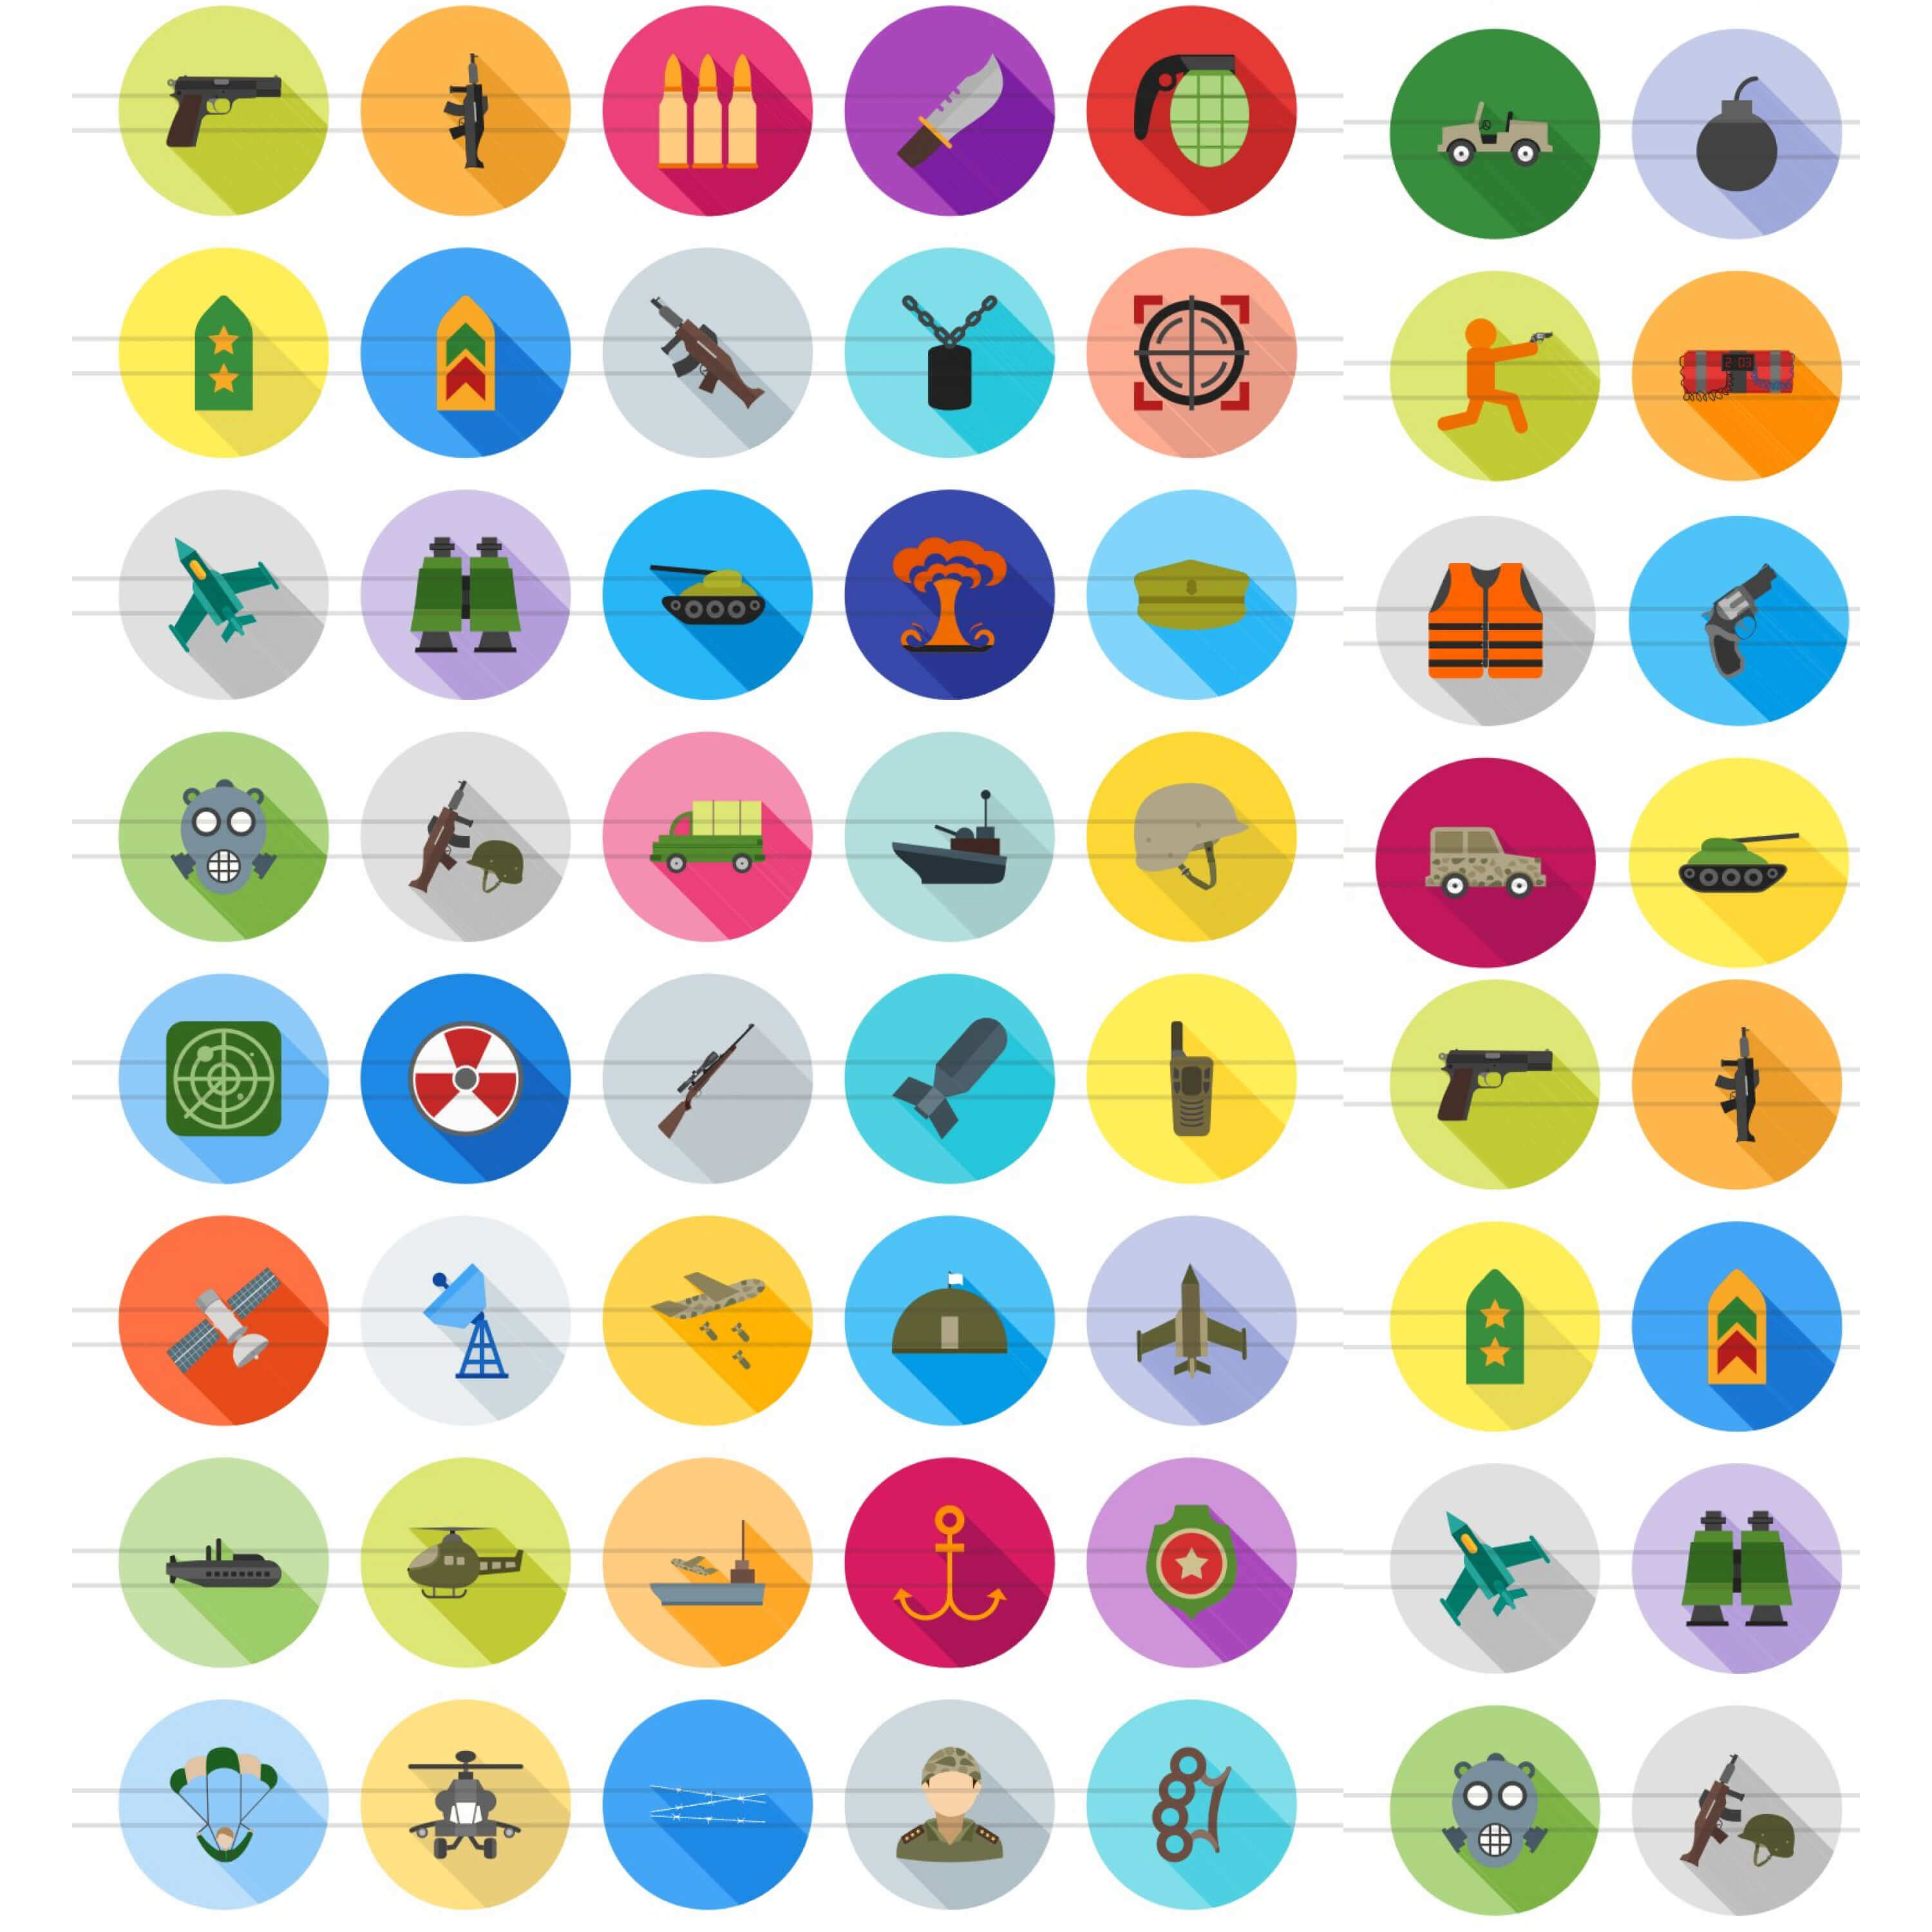 Military icons for mobile apps, websites, print, presentation, illustration, templates.